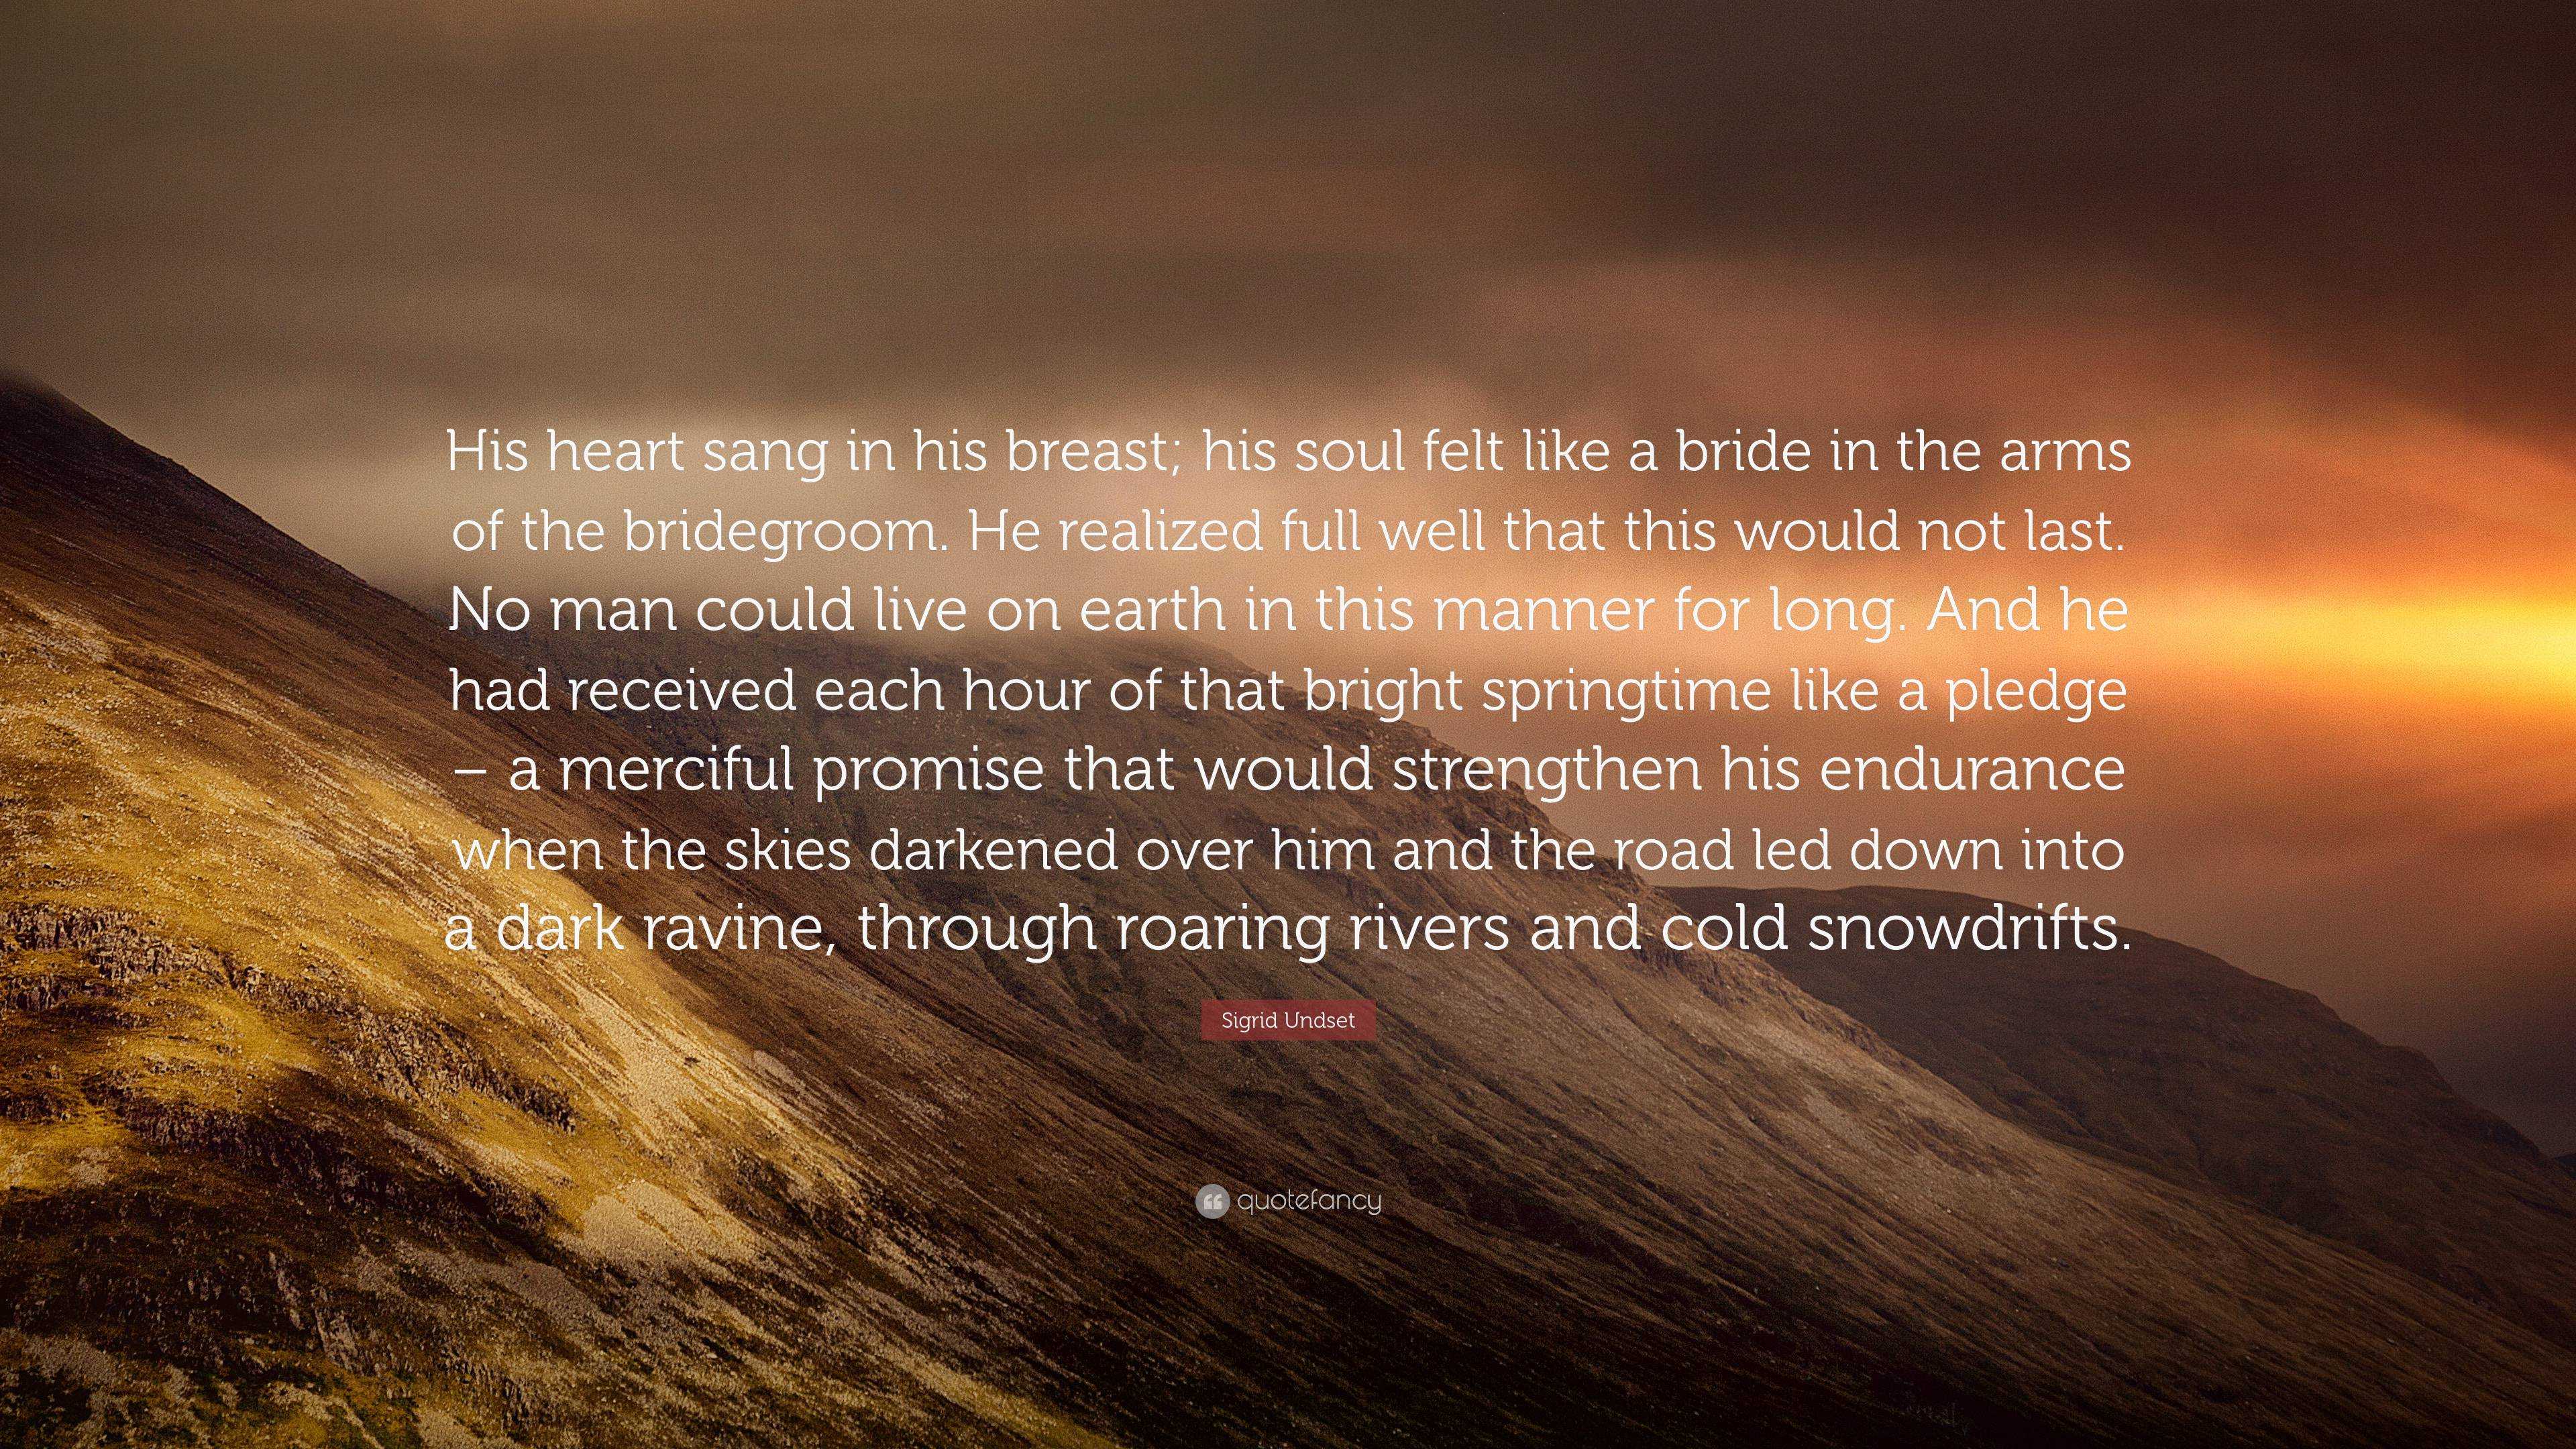 Sigrid Undset Quote: “His heart sang in his breast; his soul felt like ...